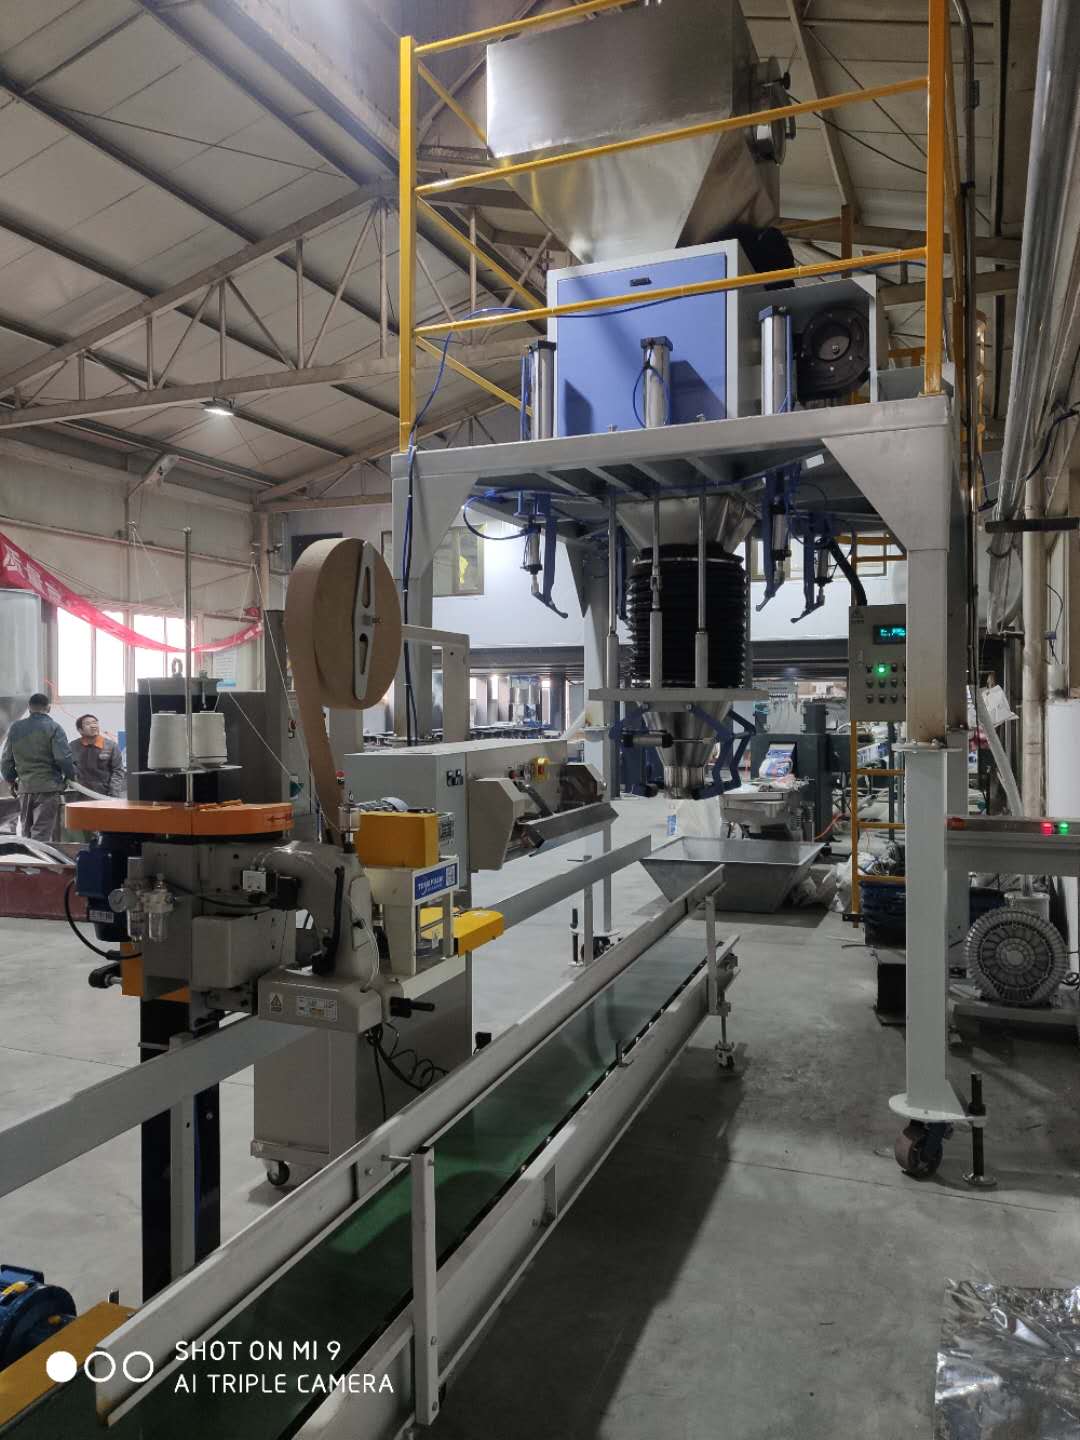 packing machine horse Feeds bagging machine Grains bagging machine Whole Grains packing machine fully Automatic Packing Palletizing Line, Fully Automatic Packing Line, Fully Automatic Bagging Line, Fu